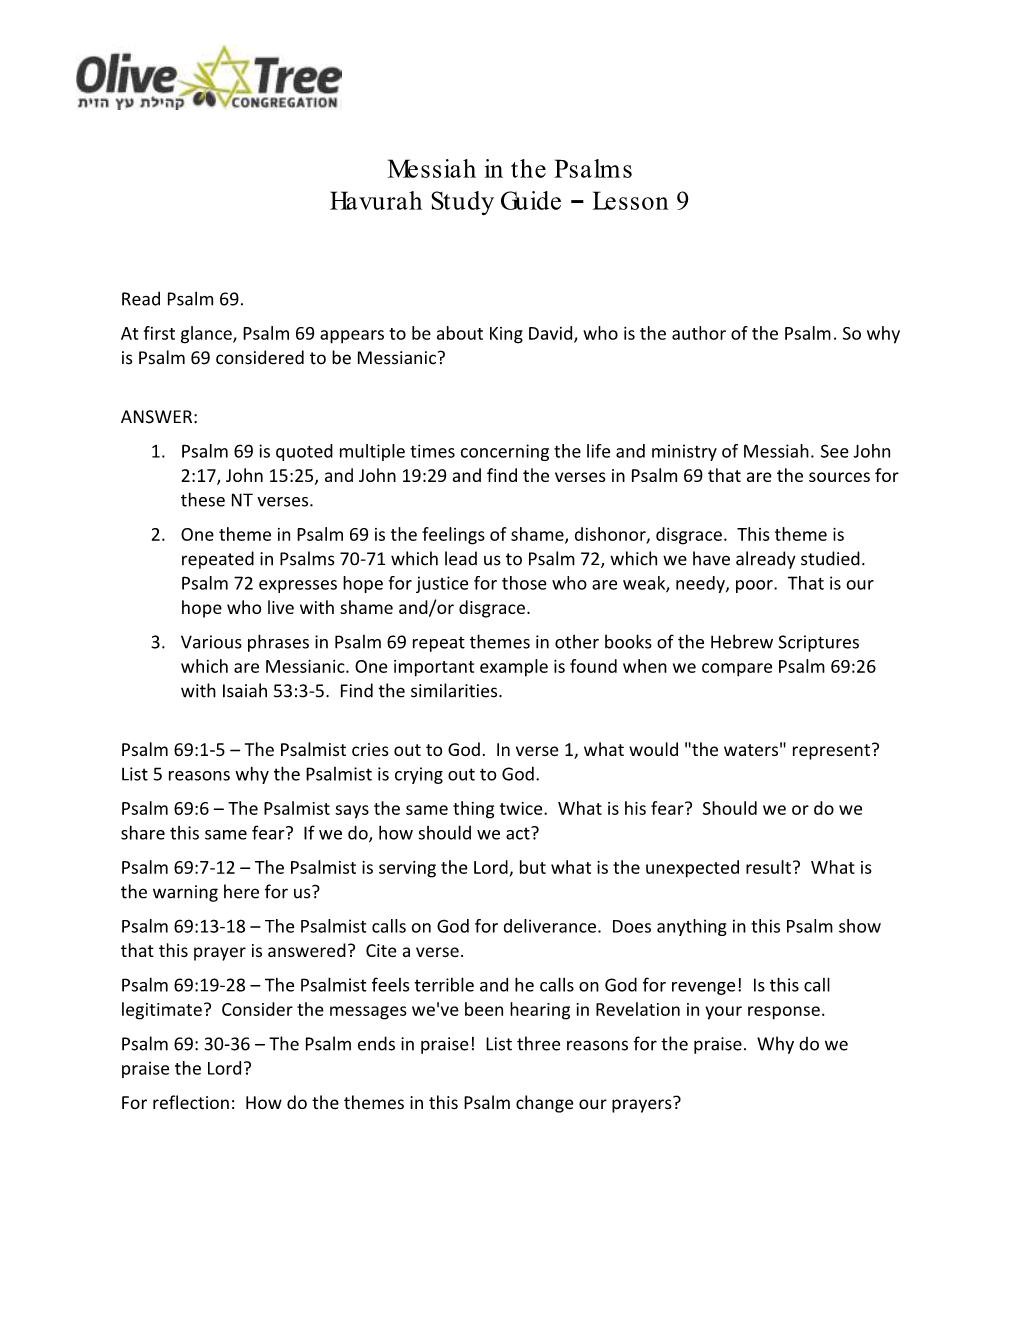 Messiah in the Psalms Havurah Study Guide Lesson 9